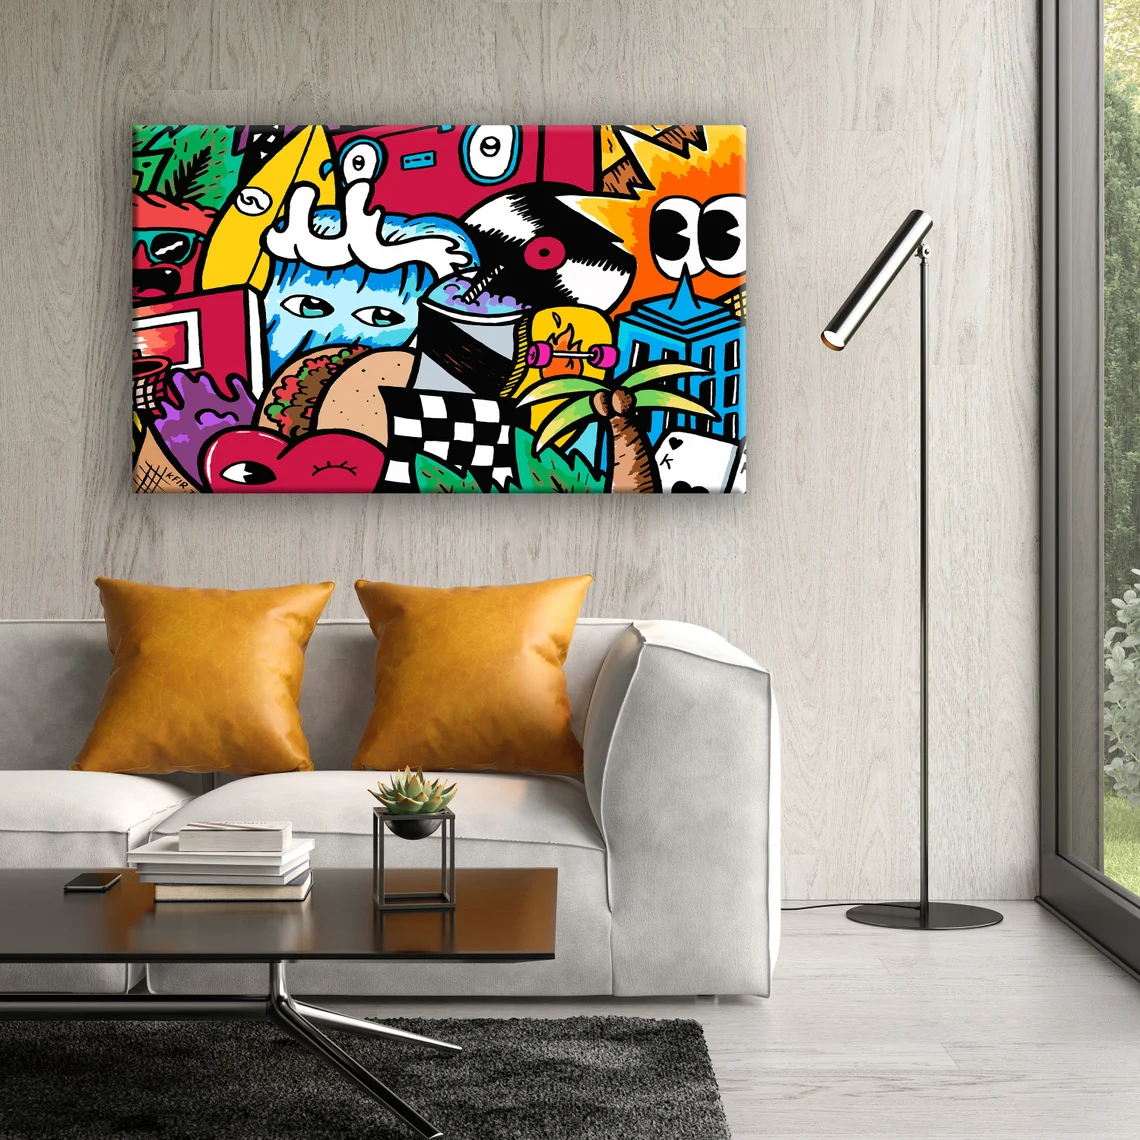 Playful colorful and abstract wall art